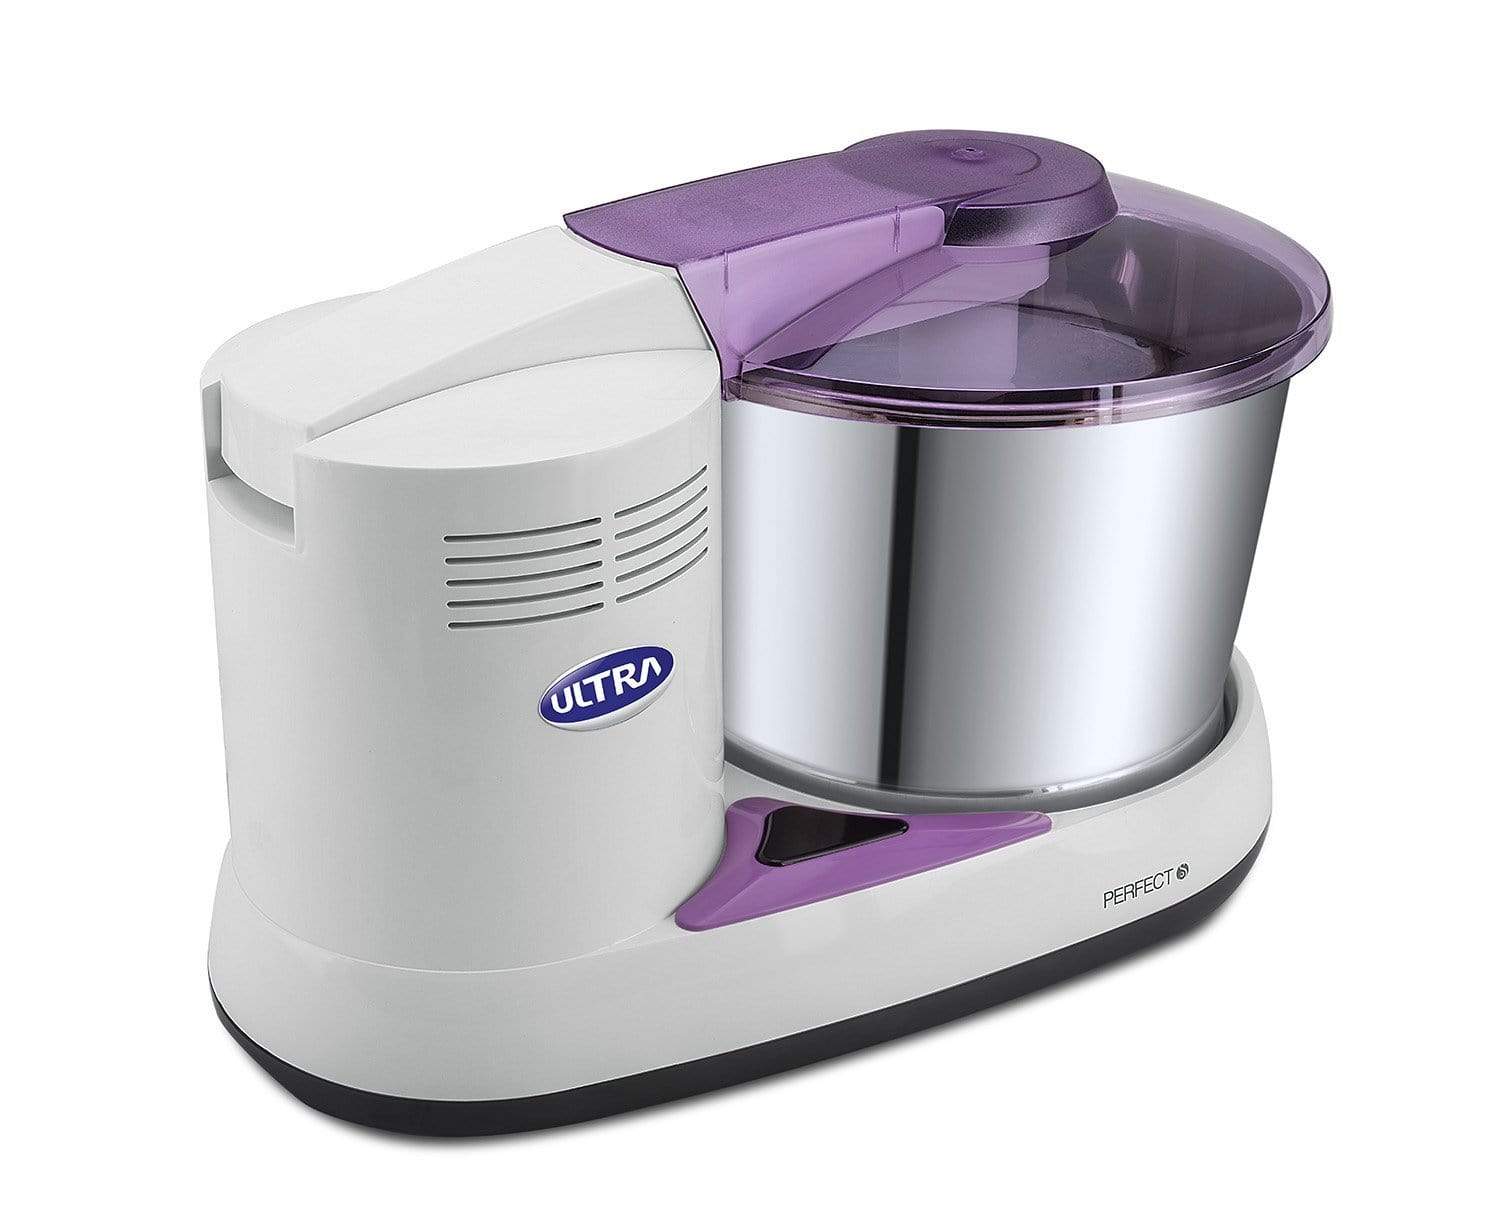 https://kitchenmart.co.in/cdn/shop/products/elgi-ultra-perfect-s-2-litre-wet-grinder-purple-8906033042166-ultra-wet-grinder-perfect-s-5046391767130_1600x.jpg?v=1607743884